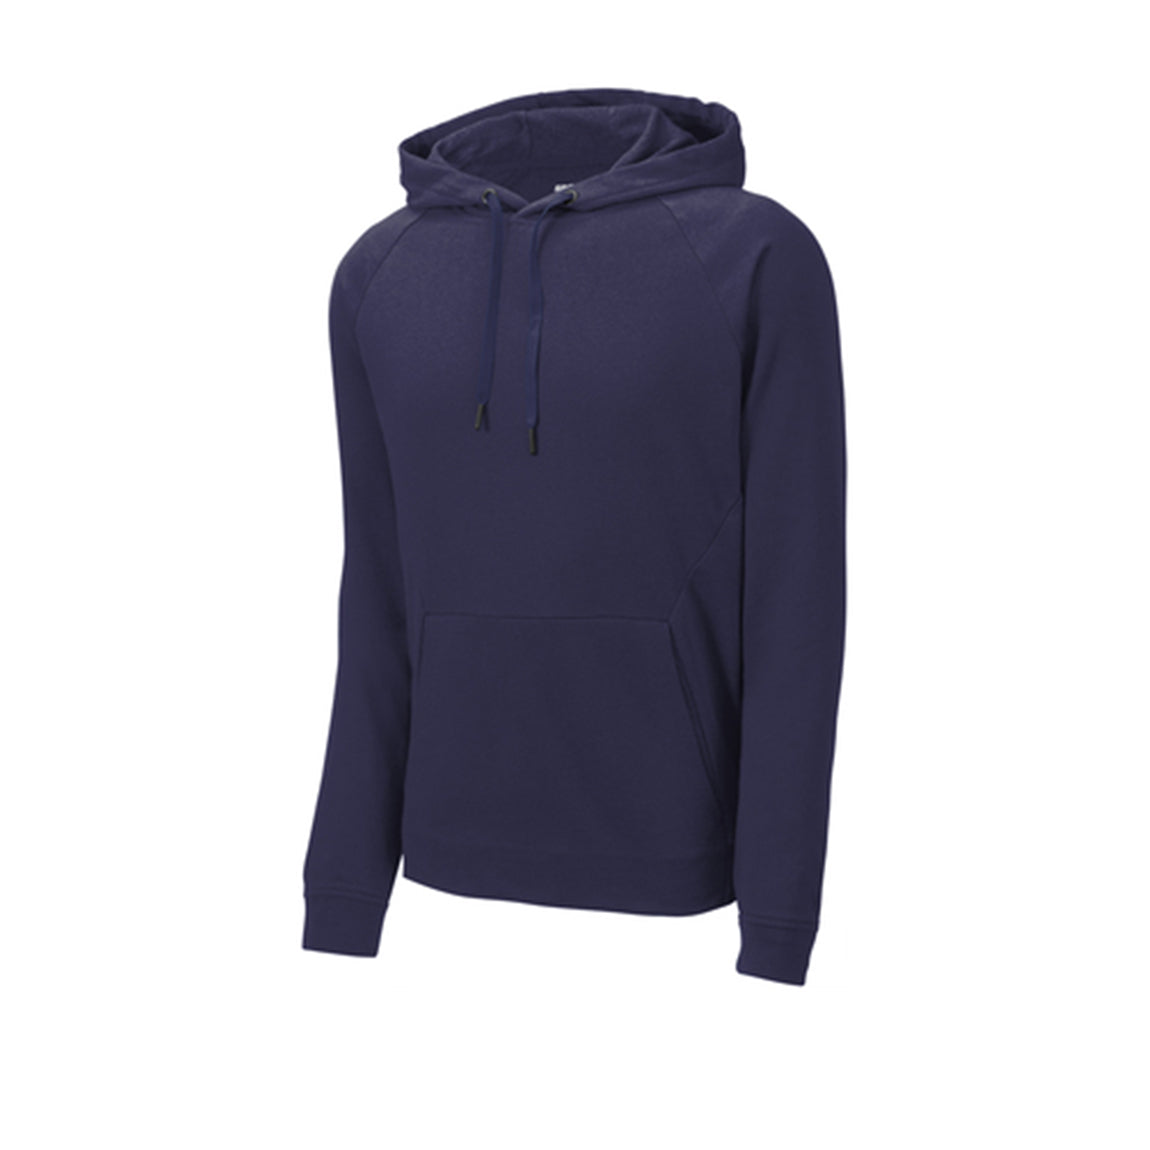 Lightweight French Terry Pullover Hoodie